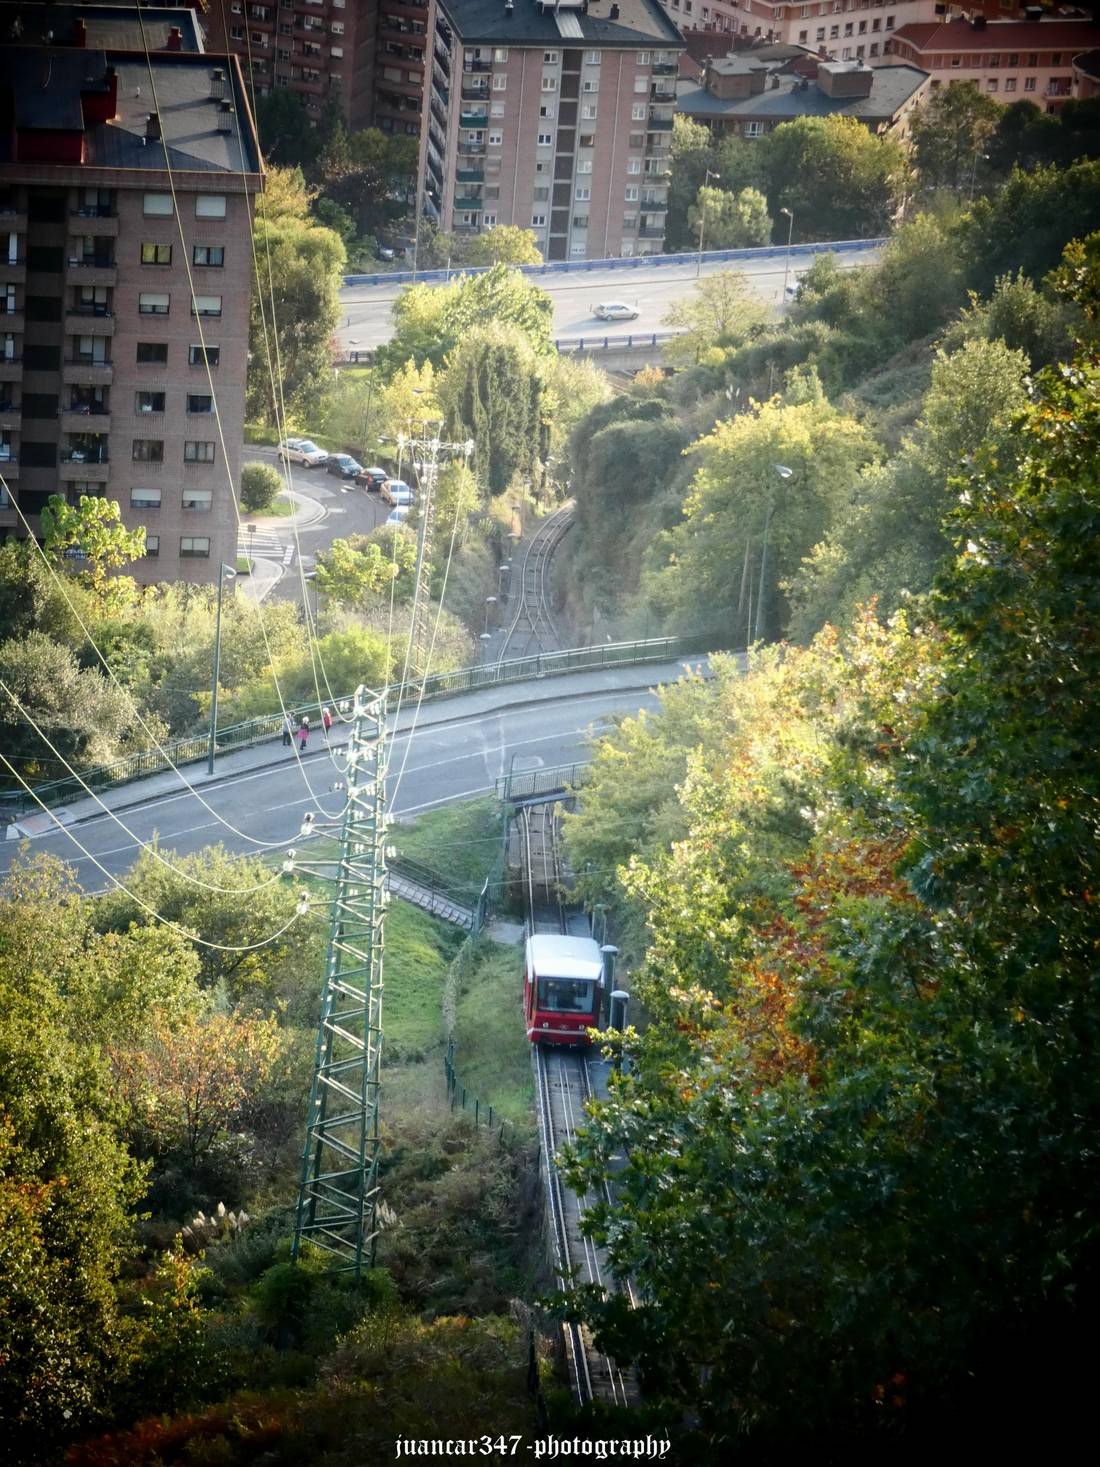 Ascent of the funicular to the top of Mount Artxanda